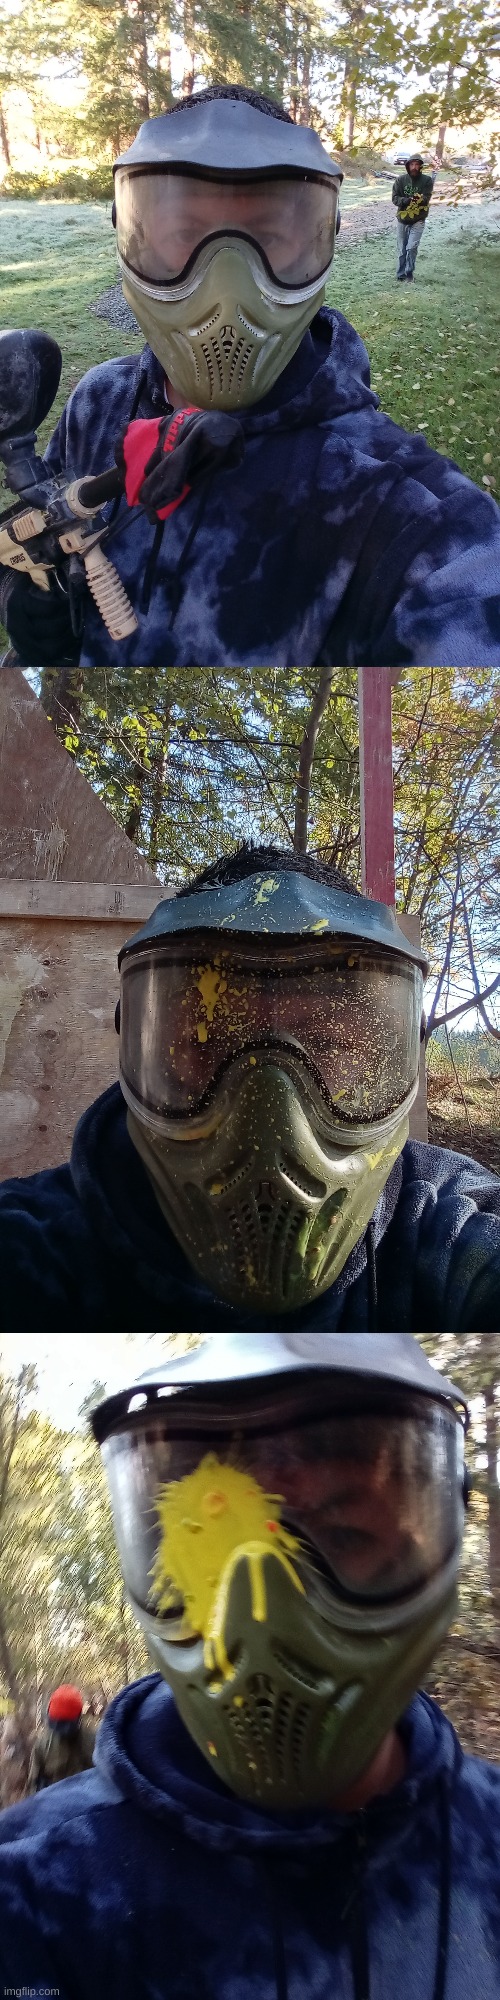 went paintballing for 4 hours today(these three pics are three different pics) | image tagged in paintballing,fun,headshots,funny | made w/ Imgflip meme maker